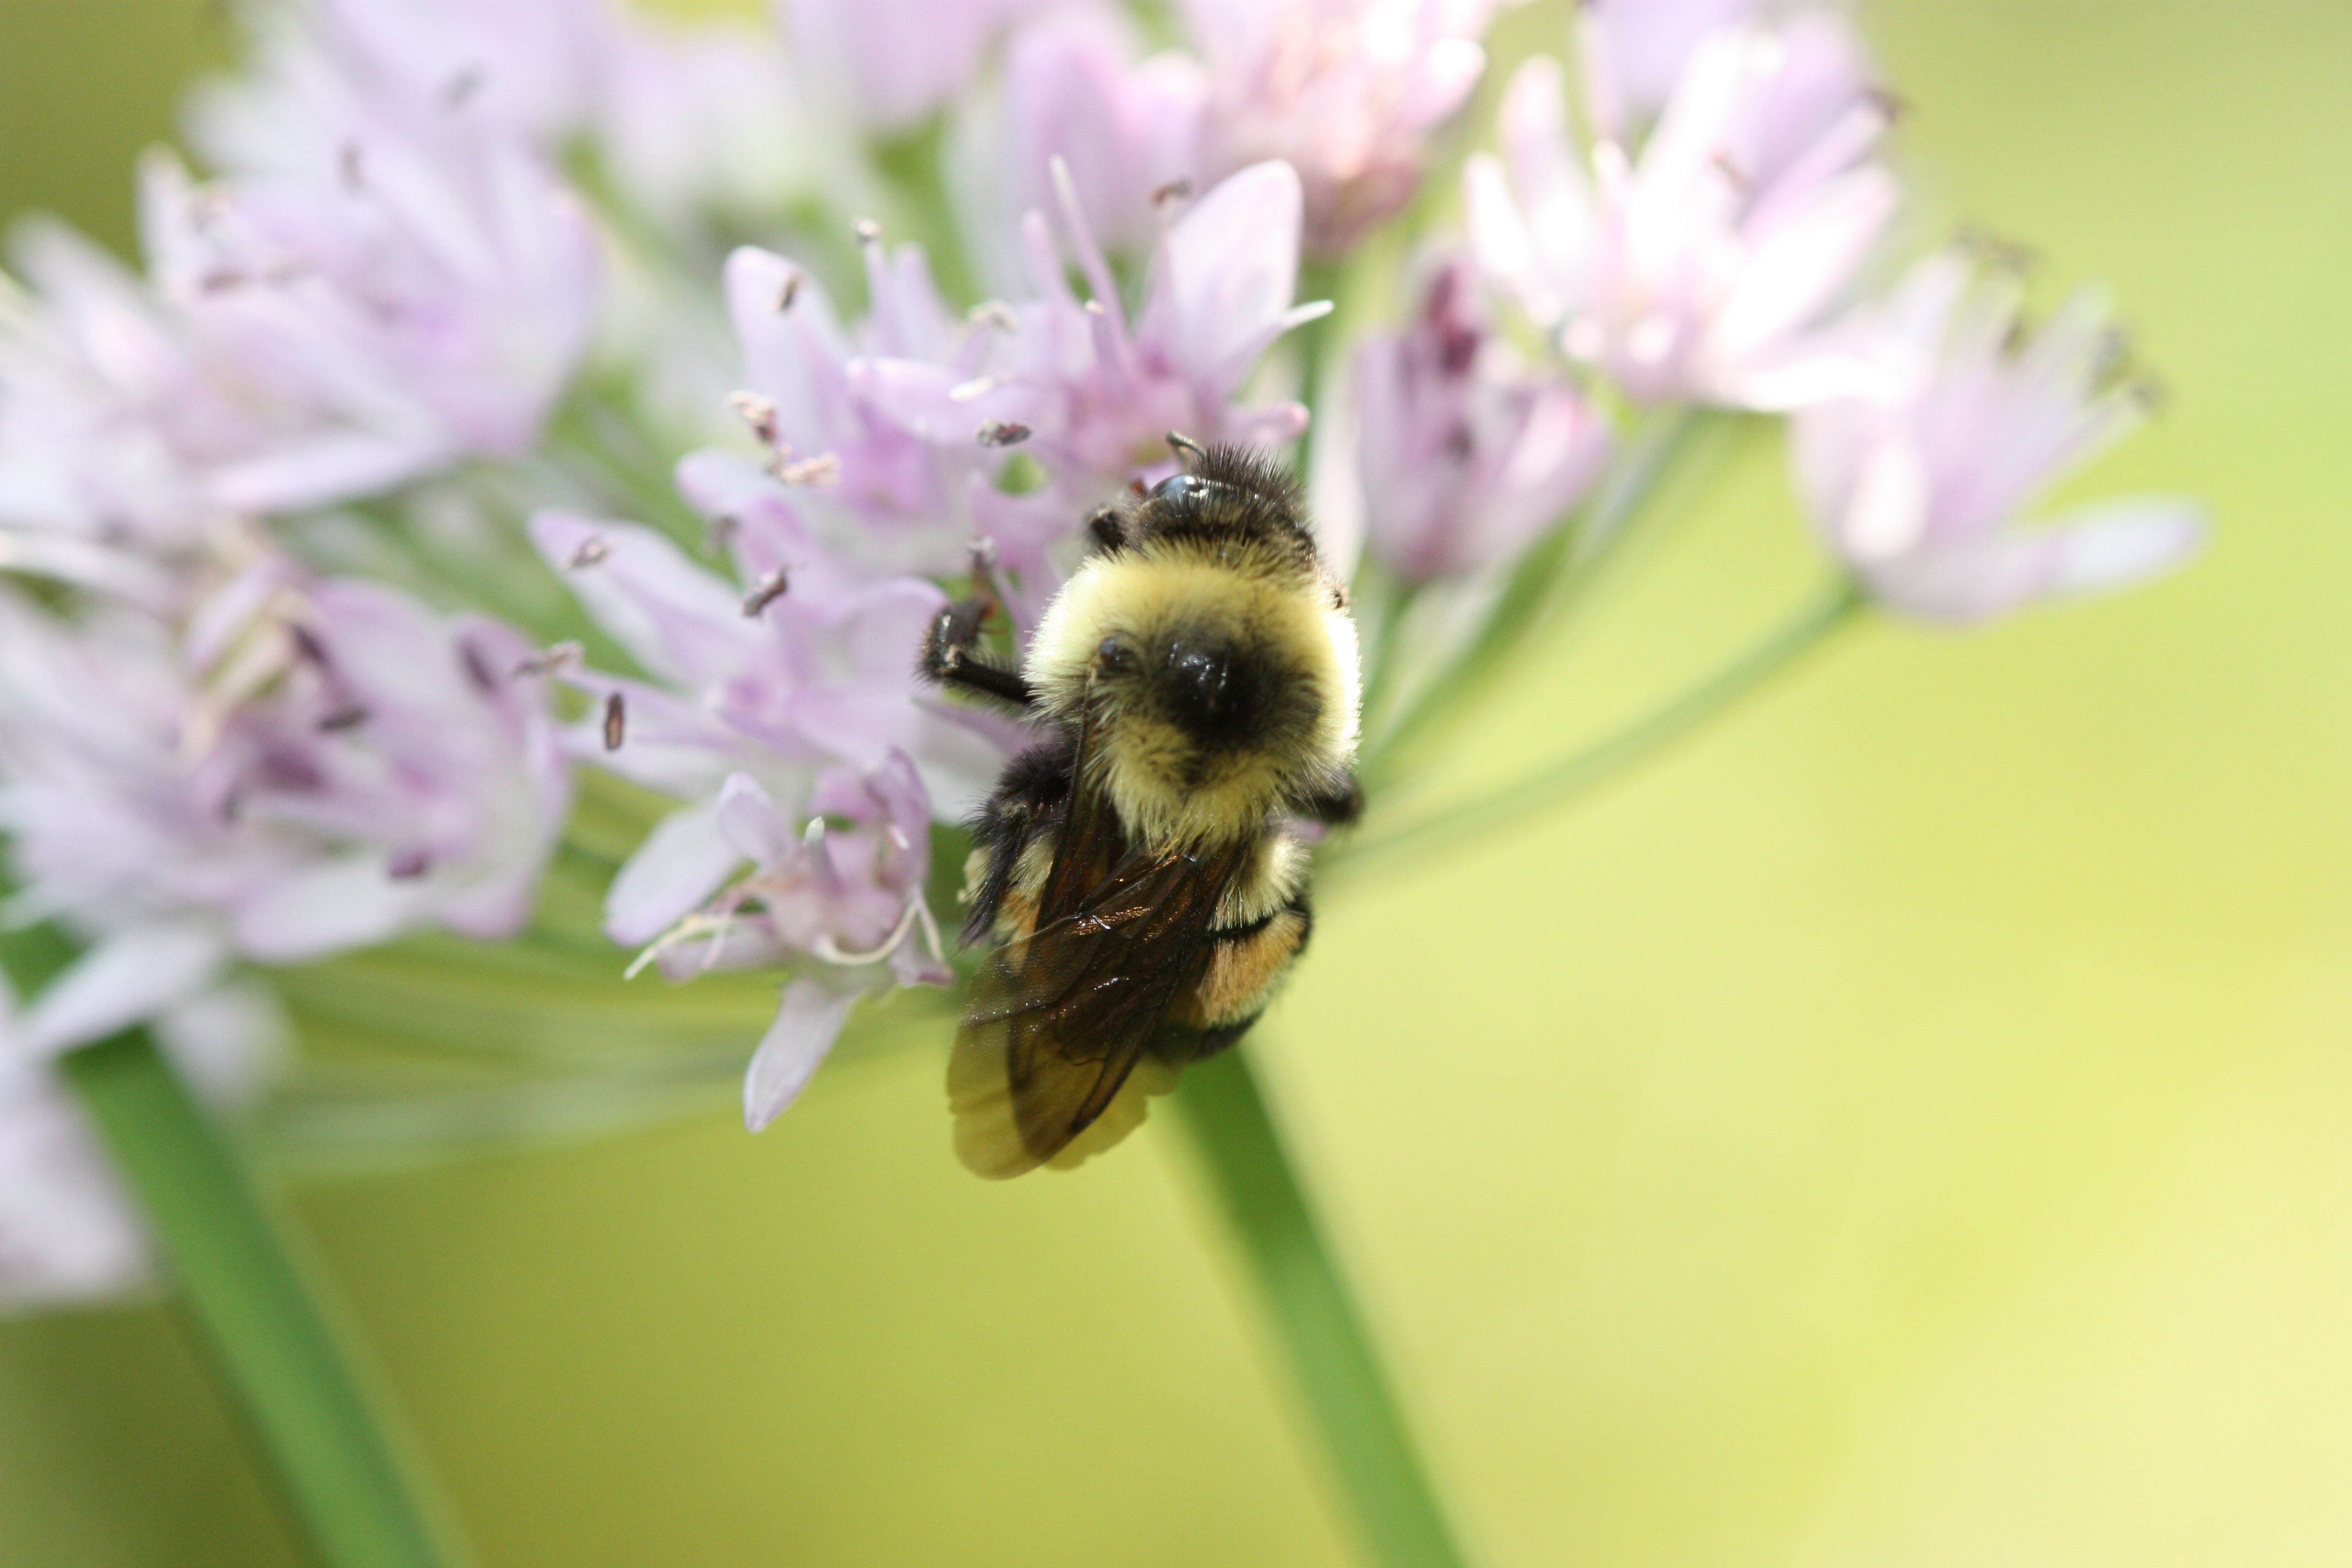 A fuzzy bee with yellow and black stripes, as well as a rust-colored patch on its back, clings to a cluster of small, purple flowers.